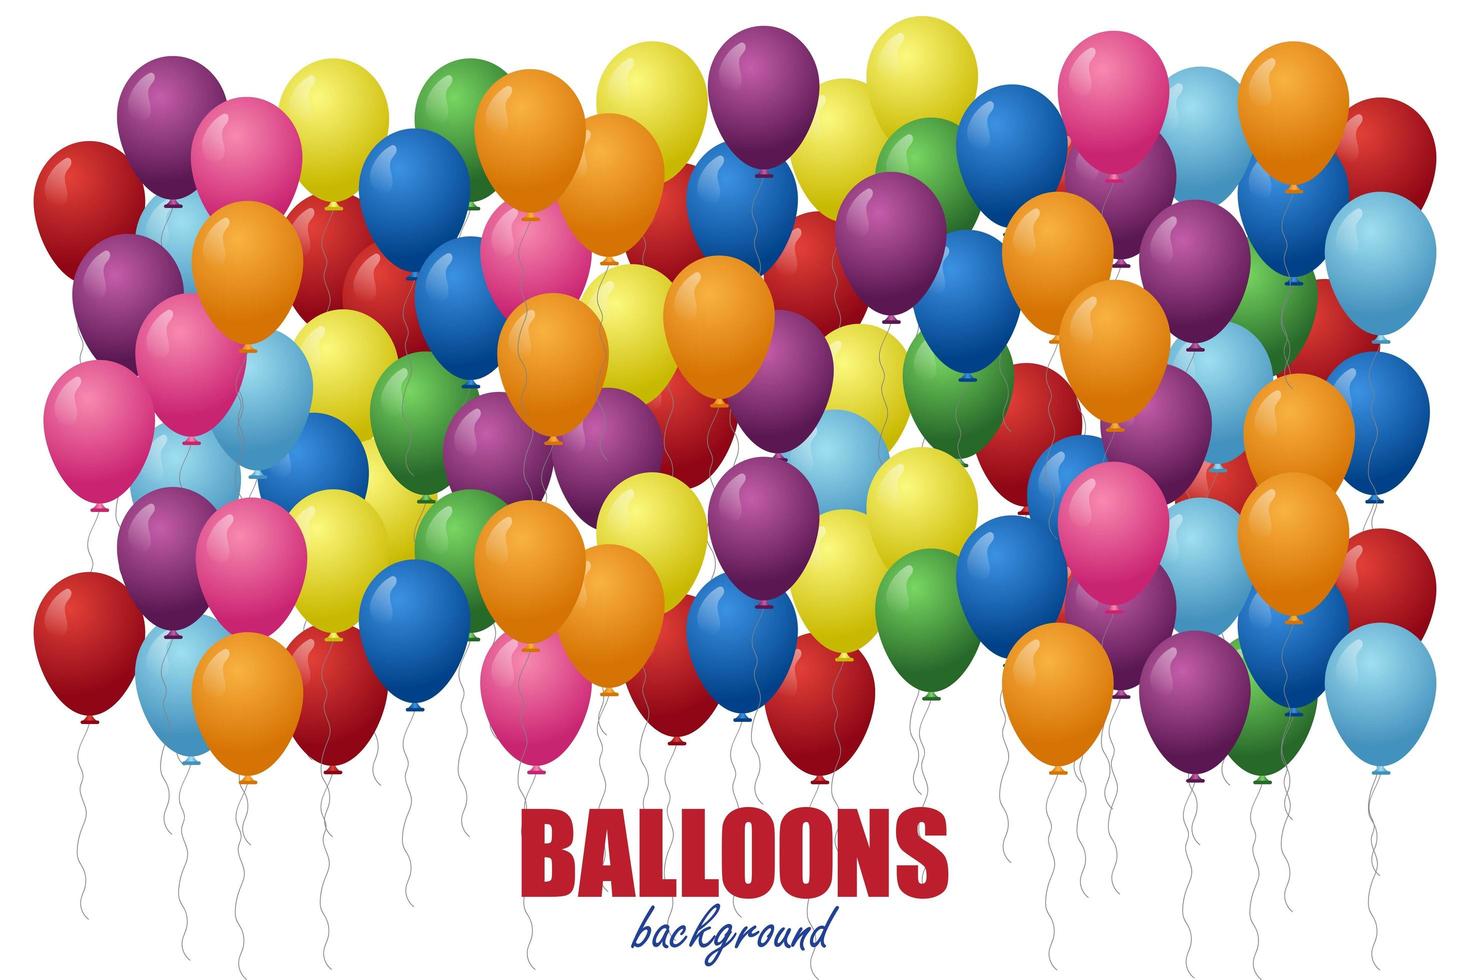 Balloons background on white background. vector